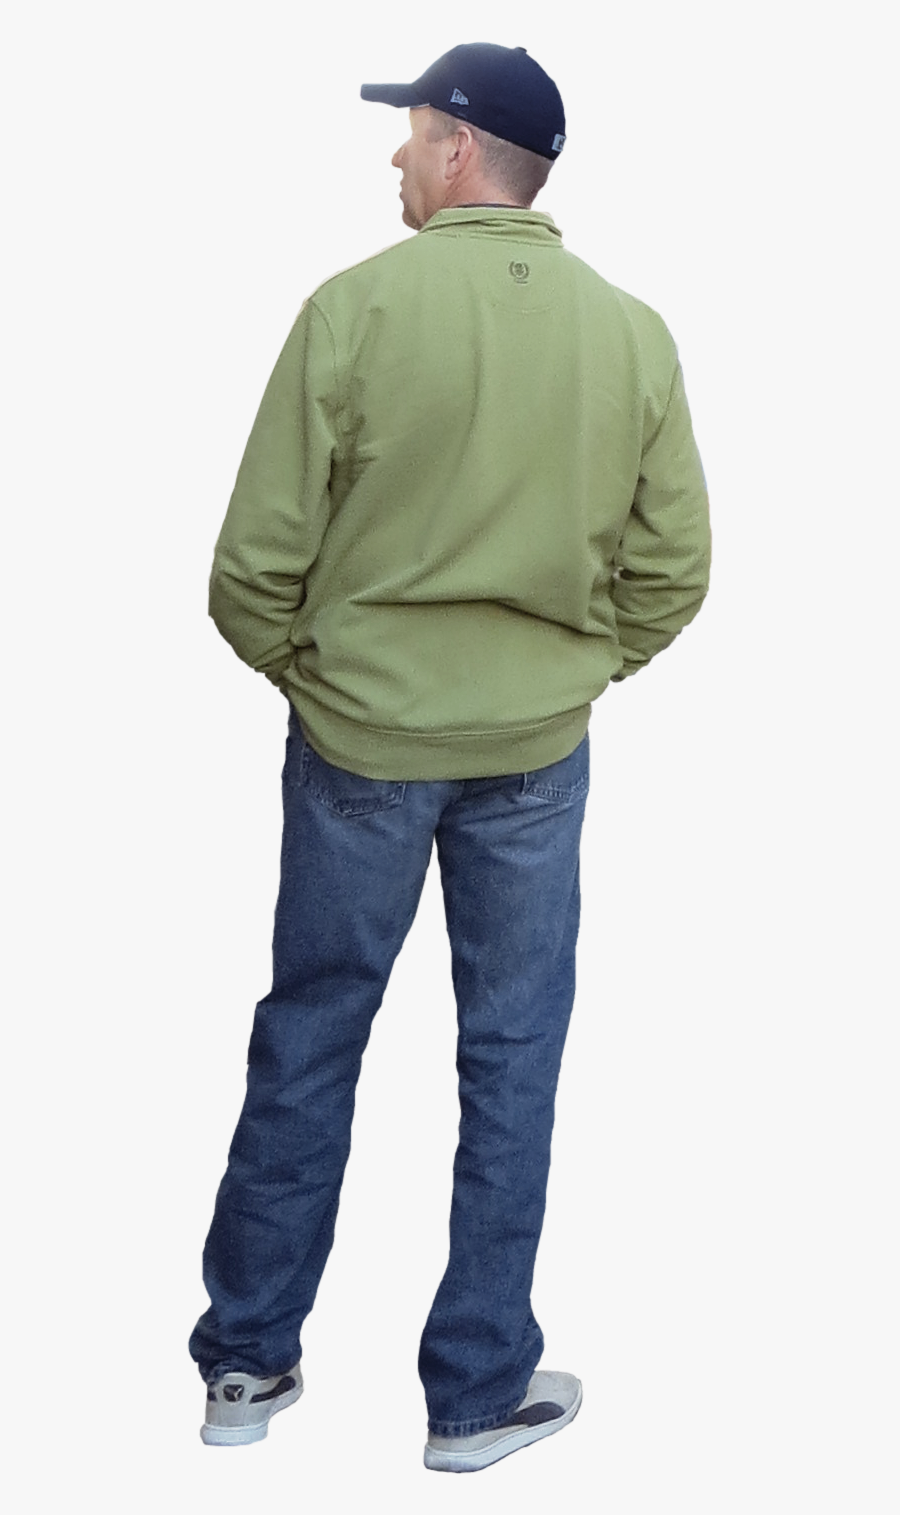 Person From Behind Png, Transparent Clipart